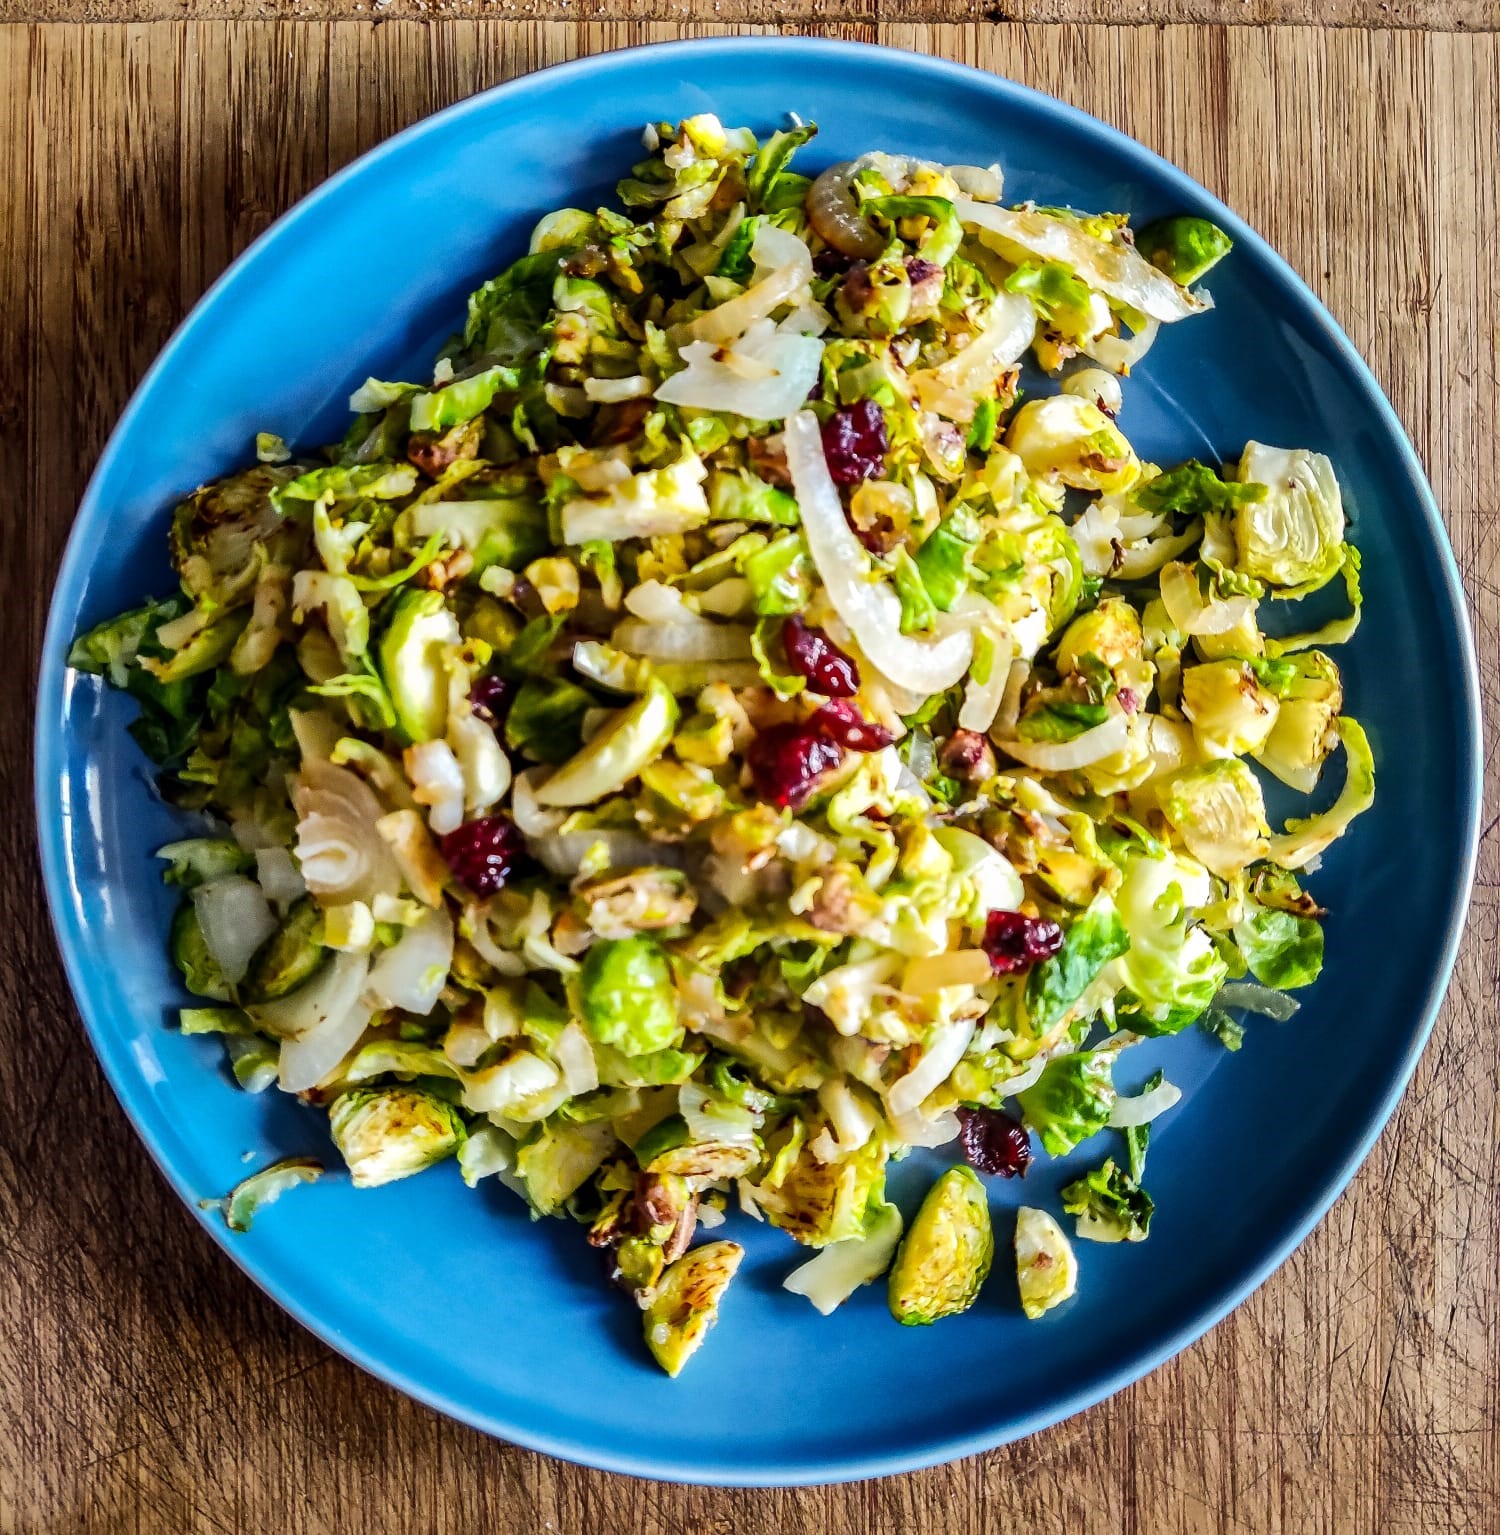 shredded-brussels-sprouts-with-pistachios-cranberries-and-parmesan-vegan-ramon-debono